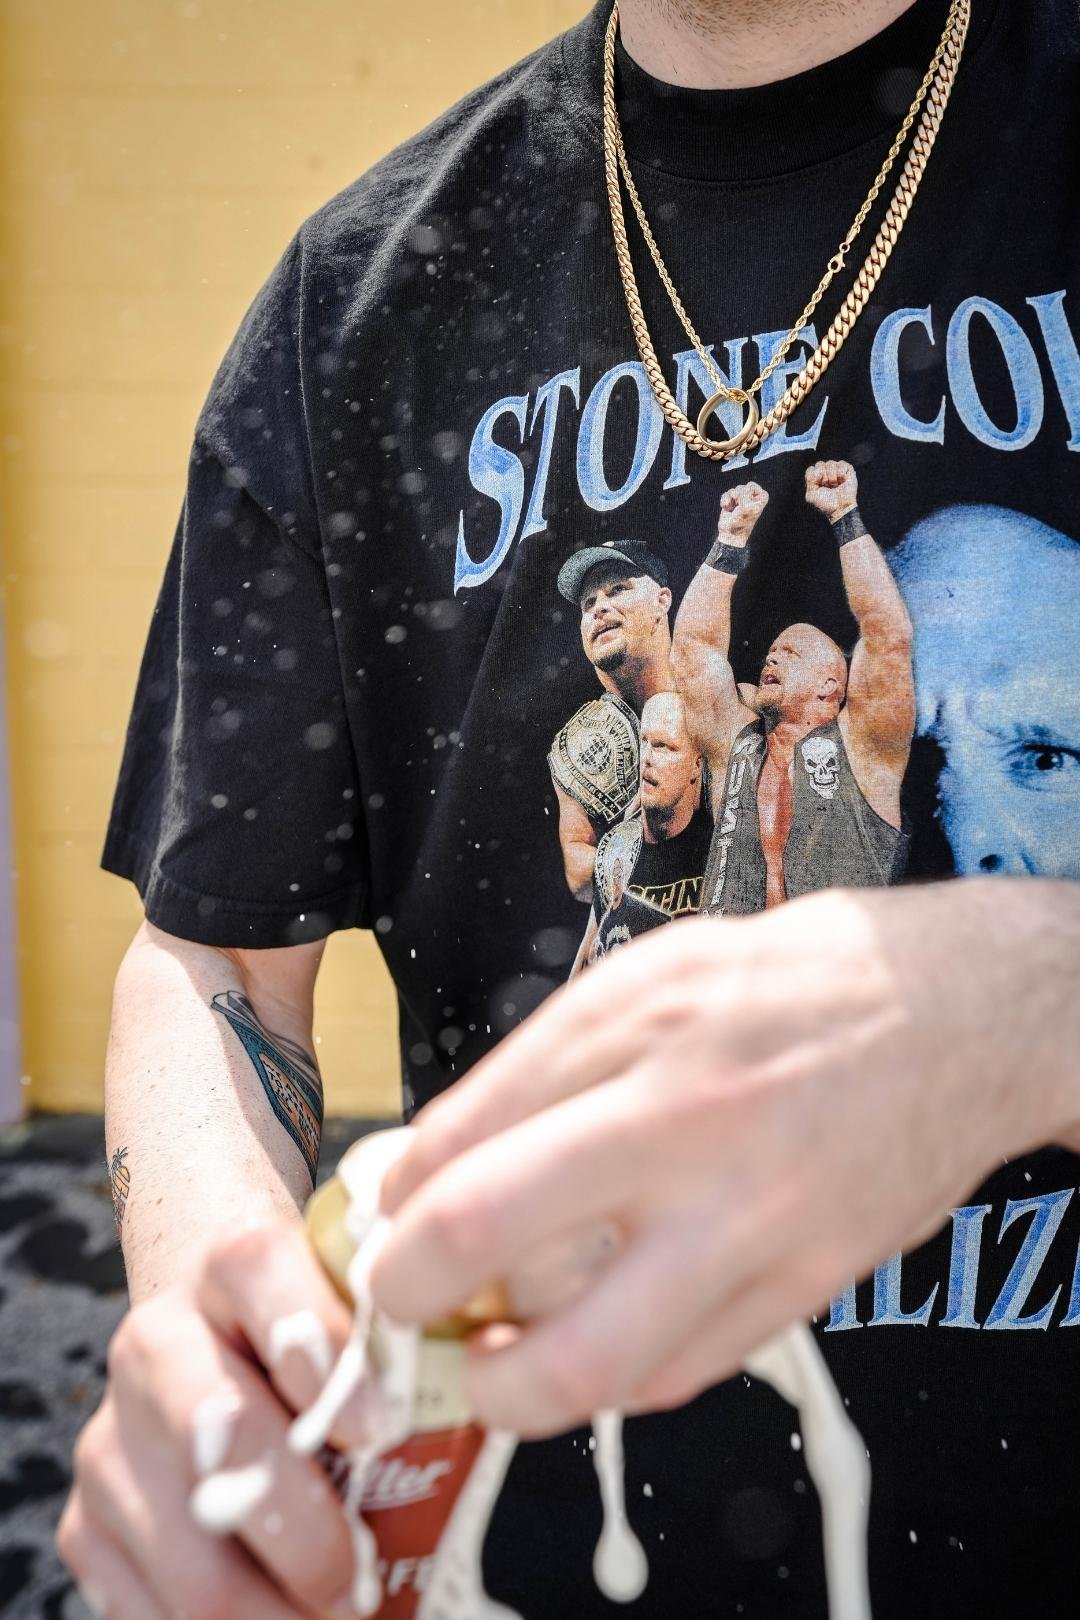 EARLY ACCESS: UNCIVILIZED "STONE COLD DAY" T-SHIRT